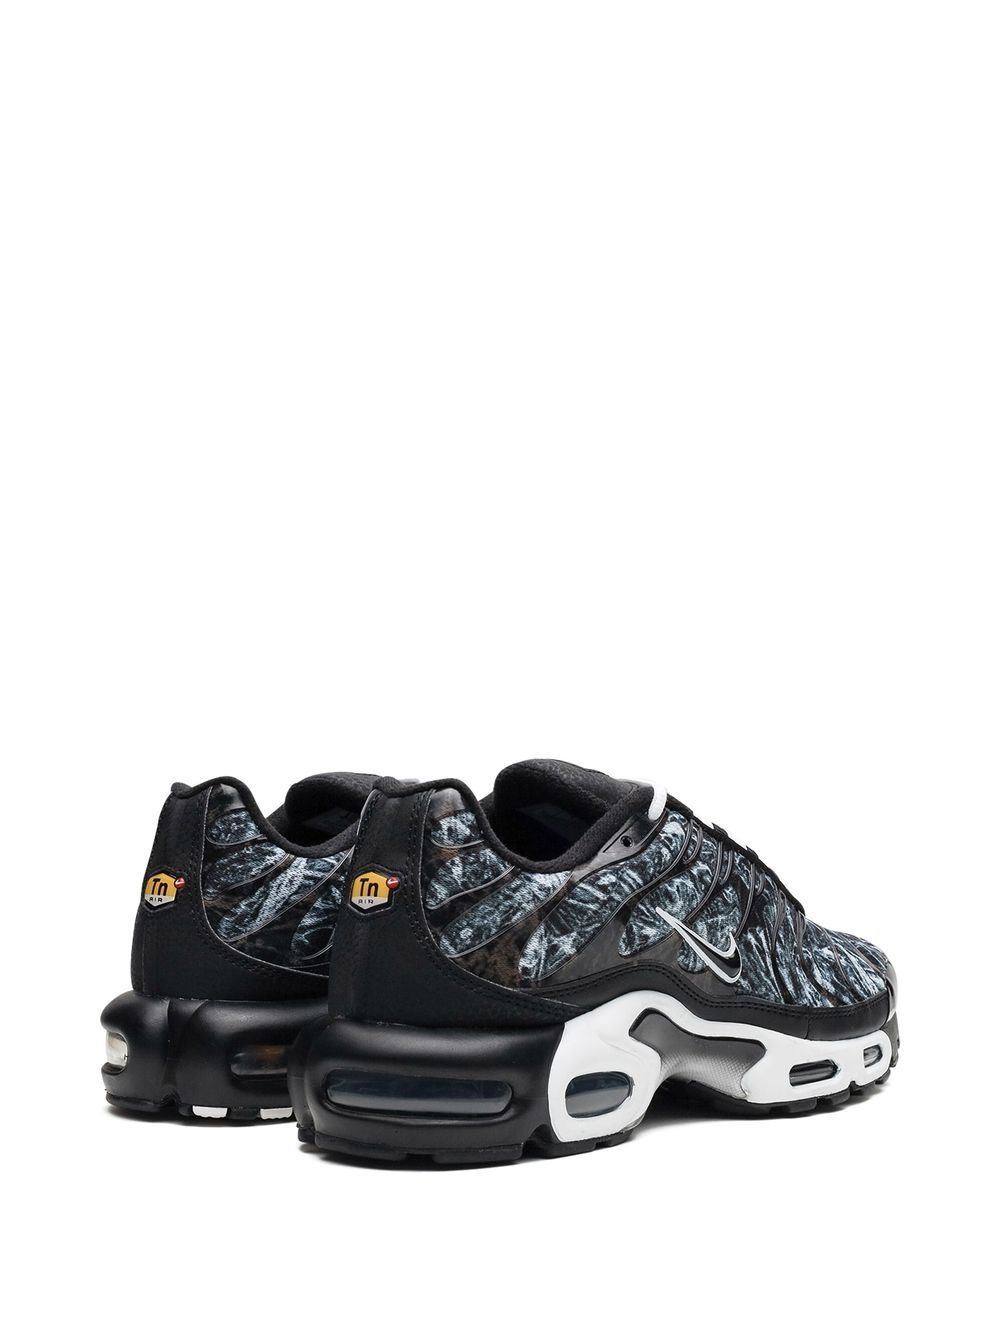 Air Max Plus AMP "Shattered Ice" sneakers - 3